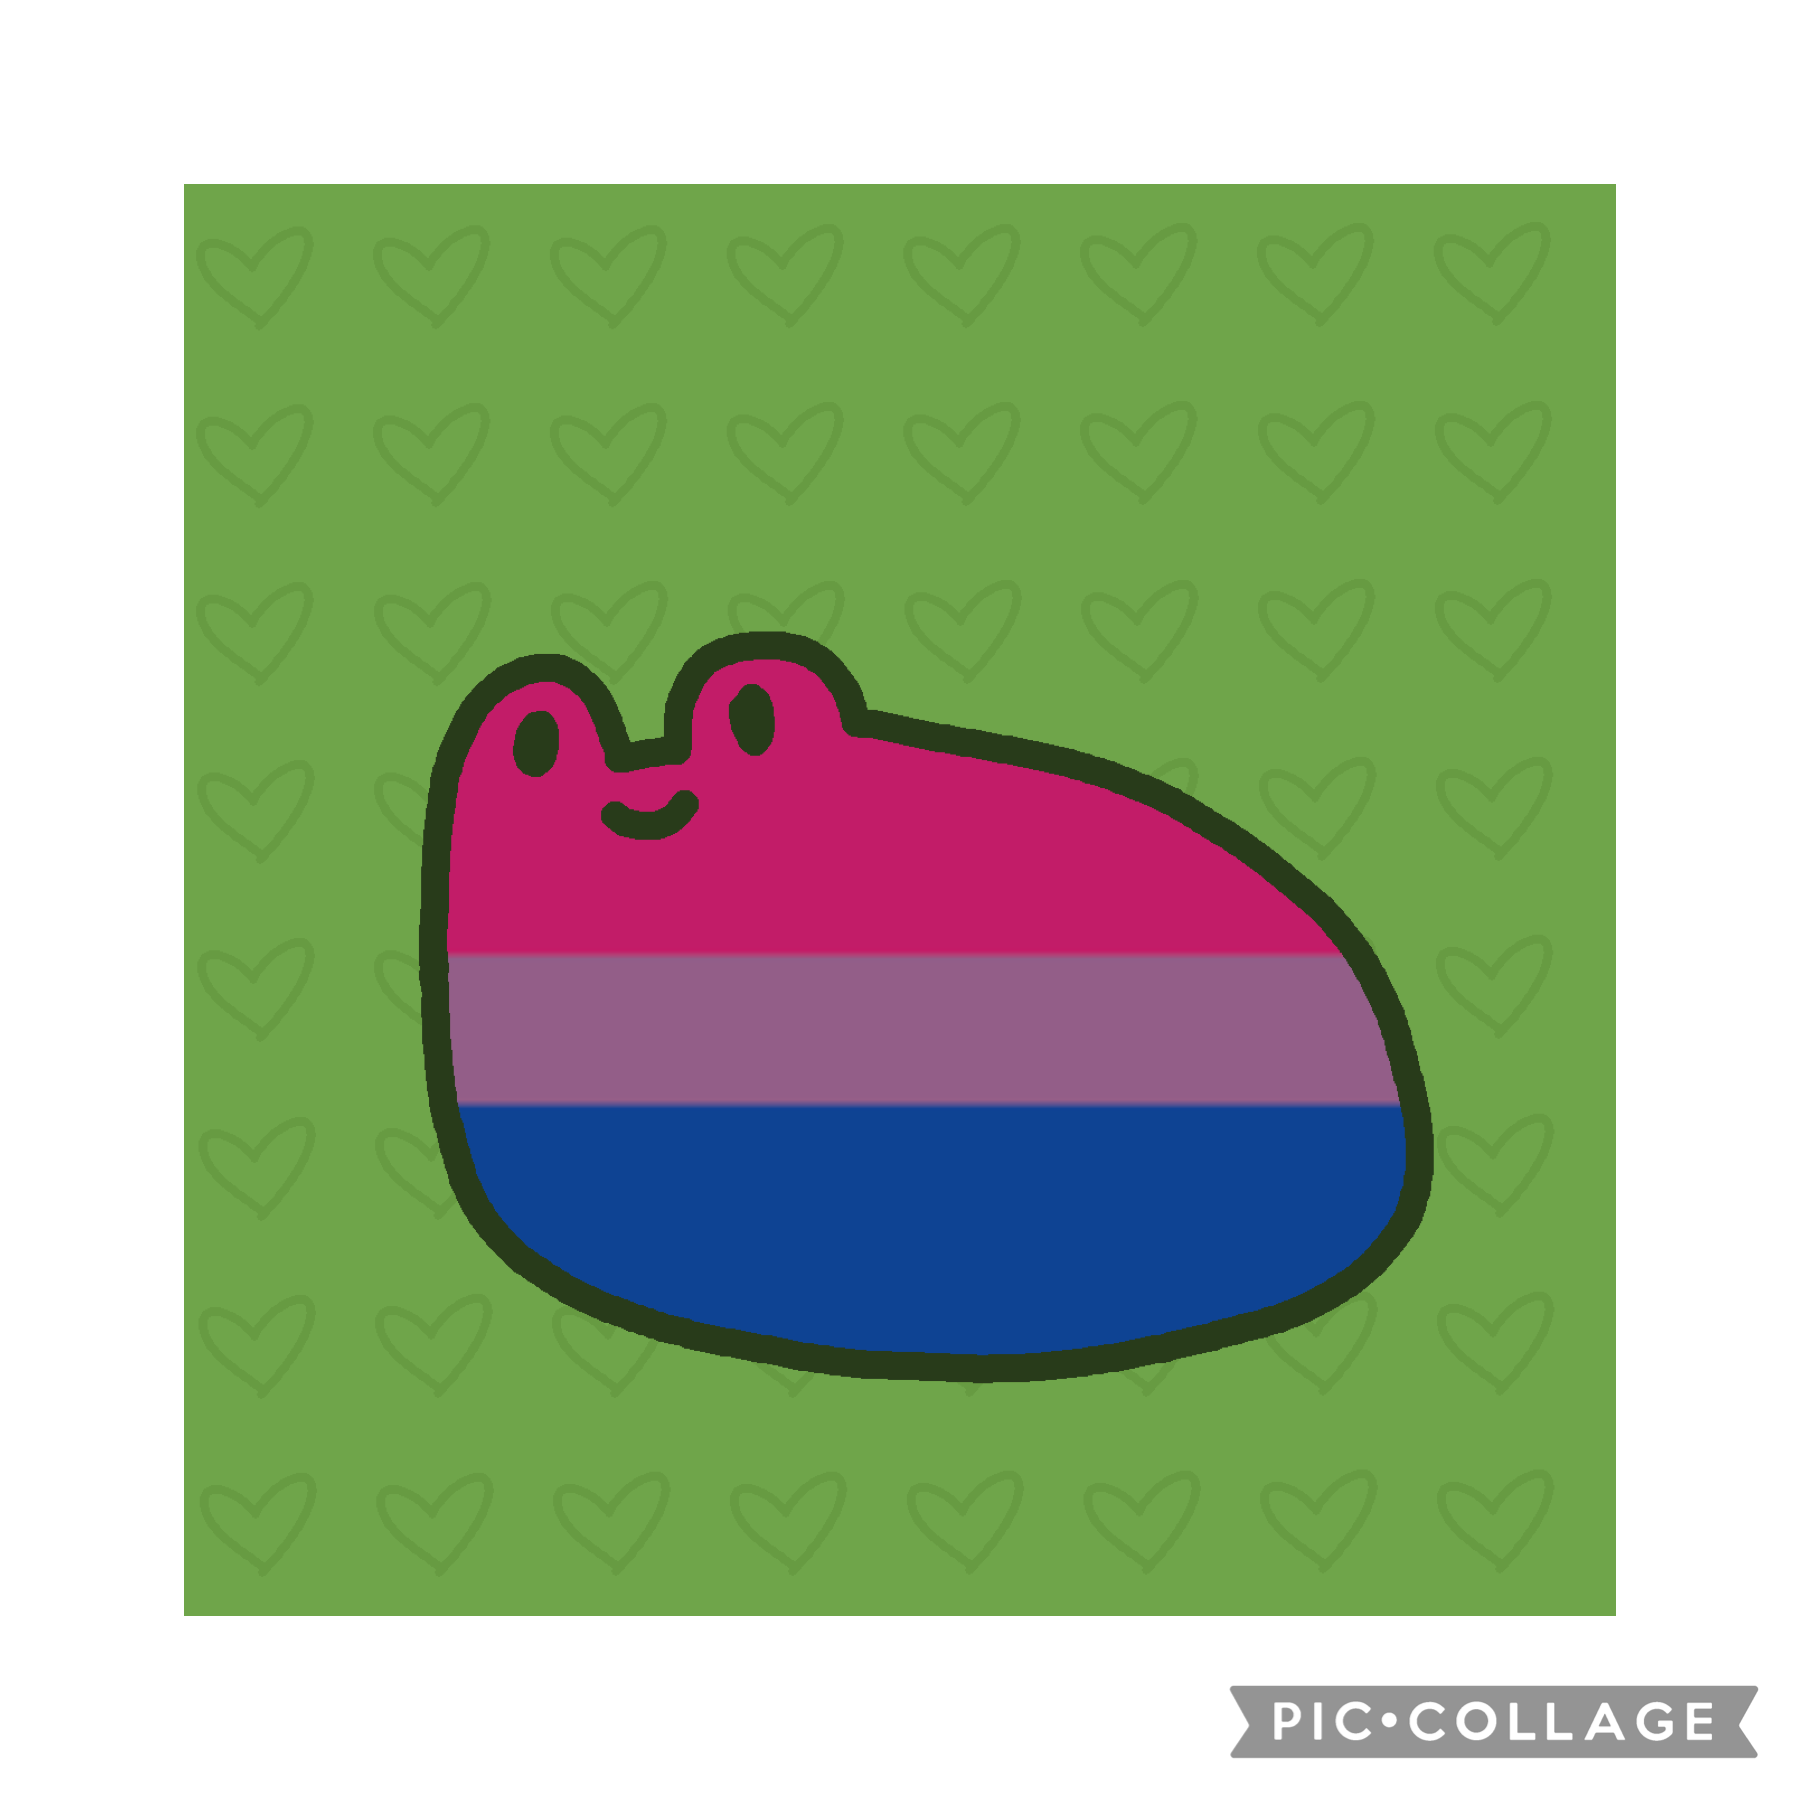 bi frog? bi frog
HAPPY PRIDE !!!
I drew this bc it made me happy :)
I have more with different flags as well :)))